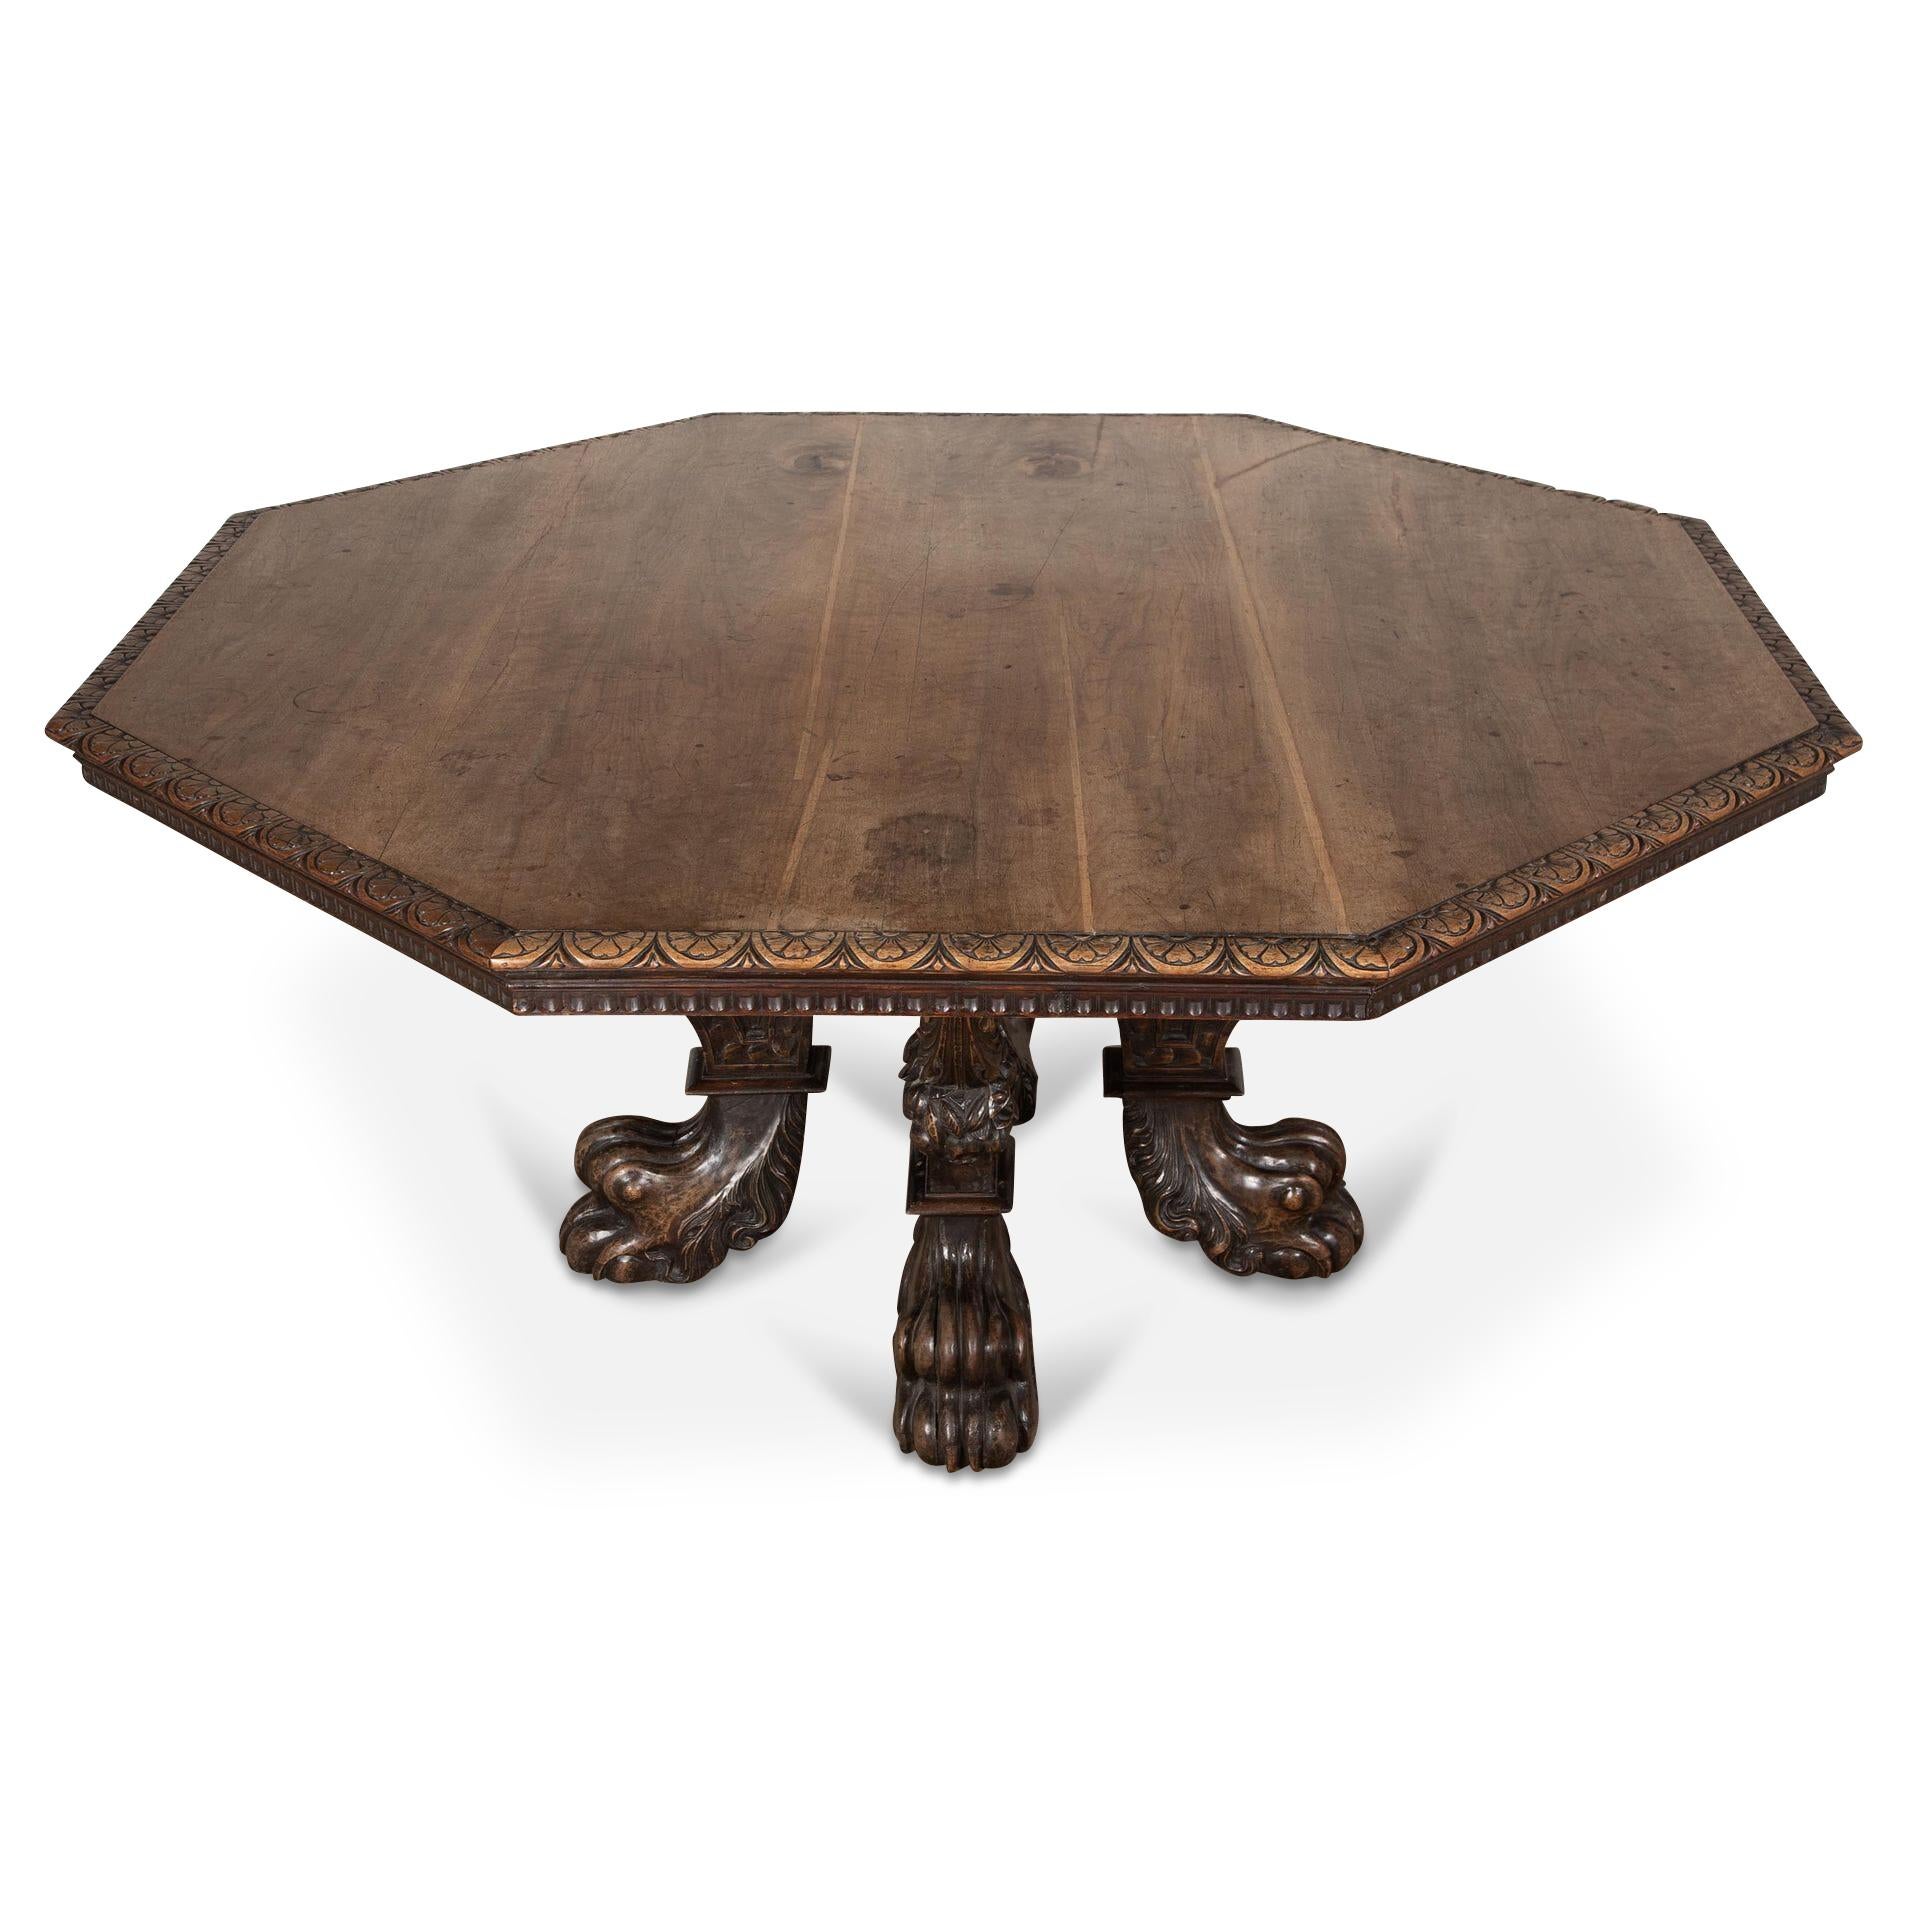 A magnificent mid C19th solid walnut centre/dining table, the octagonal top with a lunette and foliate carved edge above a fluted frieze, on a cruciform base comprised of four shaped shaped volute scrolled supports each carved with overlapping discs